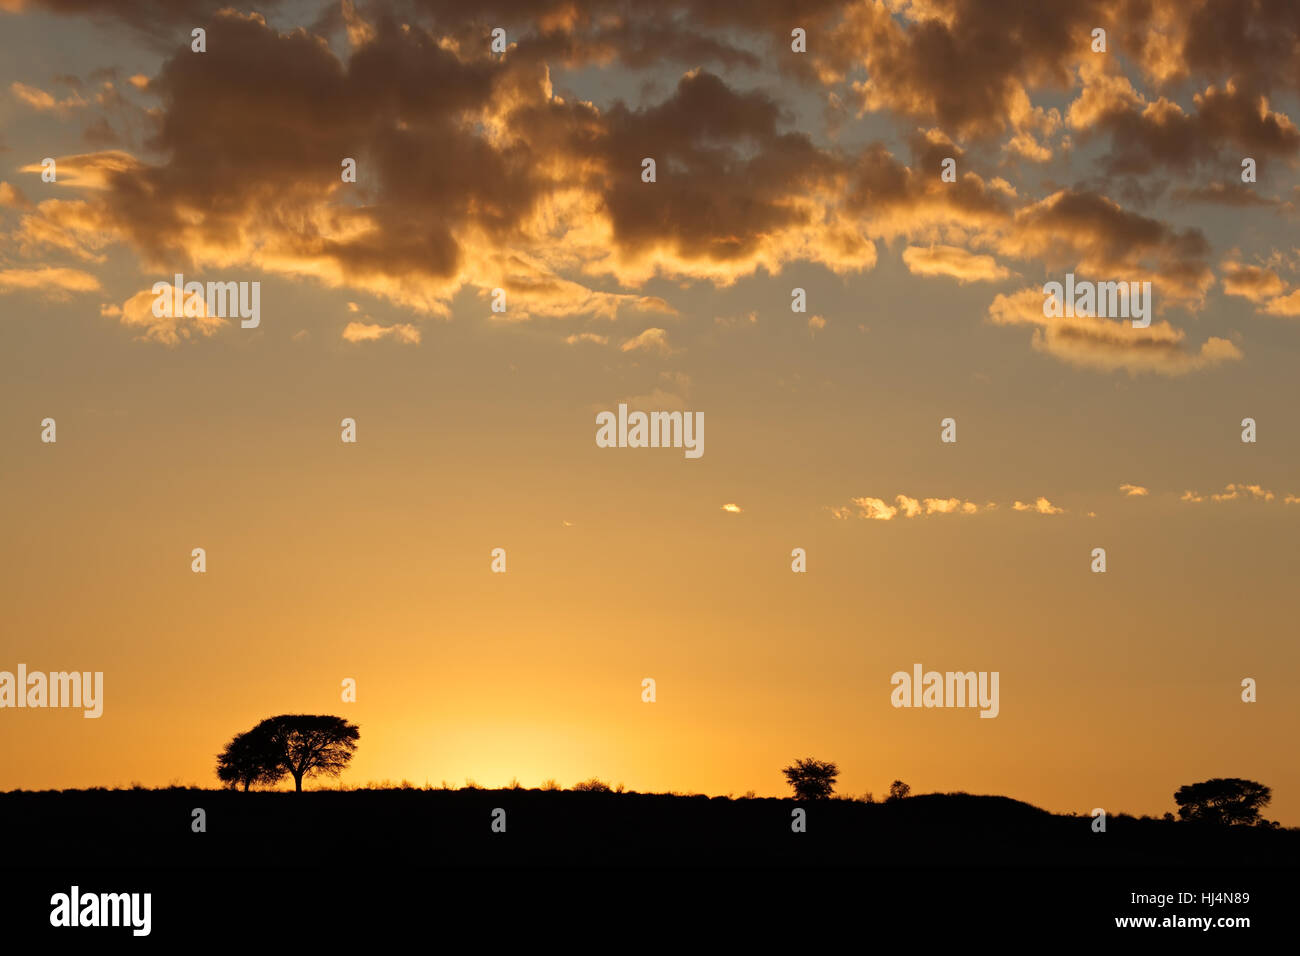 African sunrise with silhouetted trees and clouds, Kalahari desert, South Africa Stock Photo